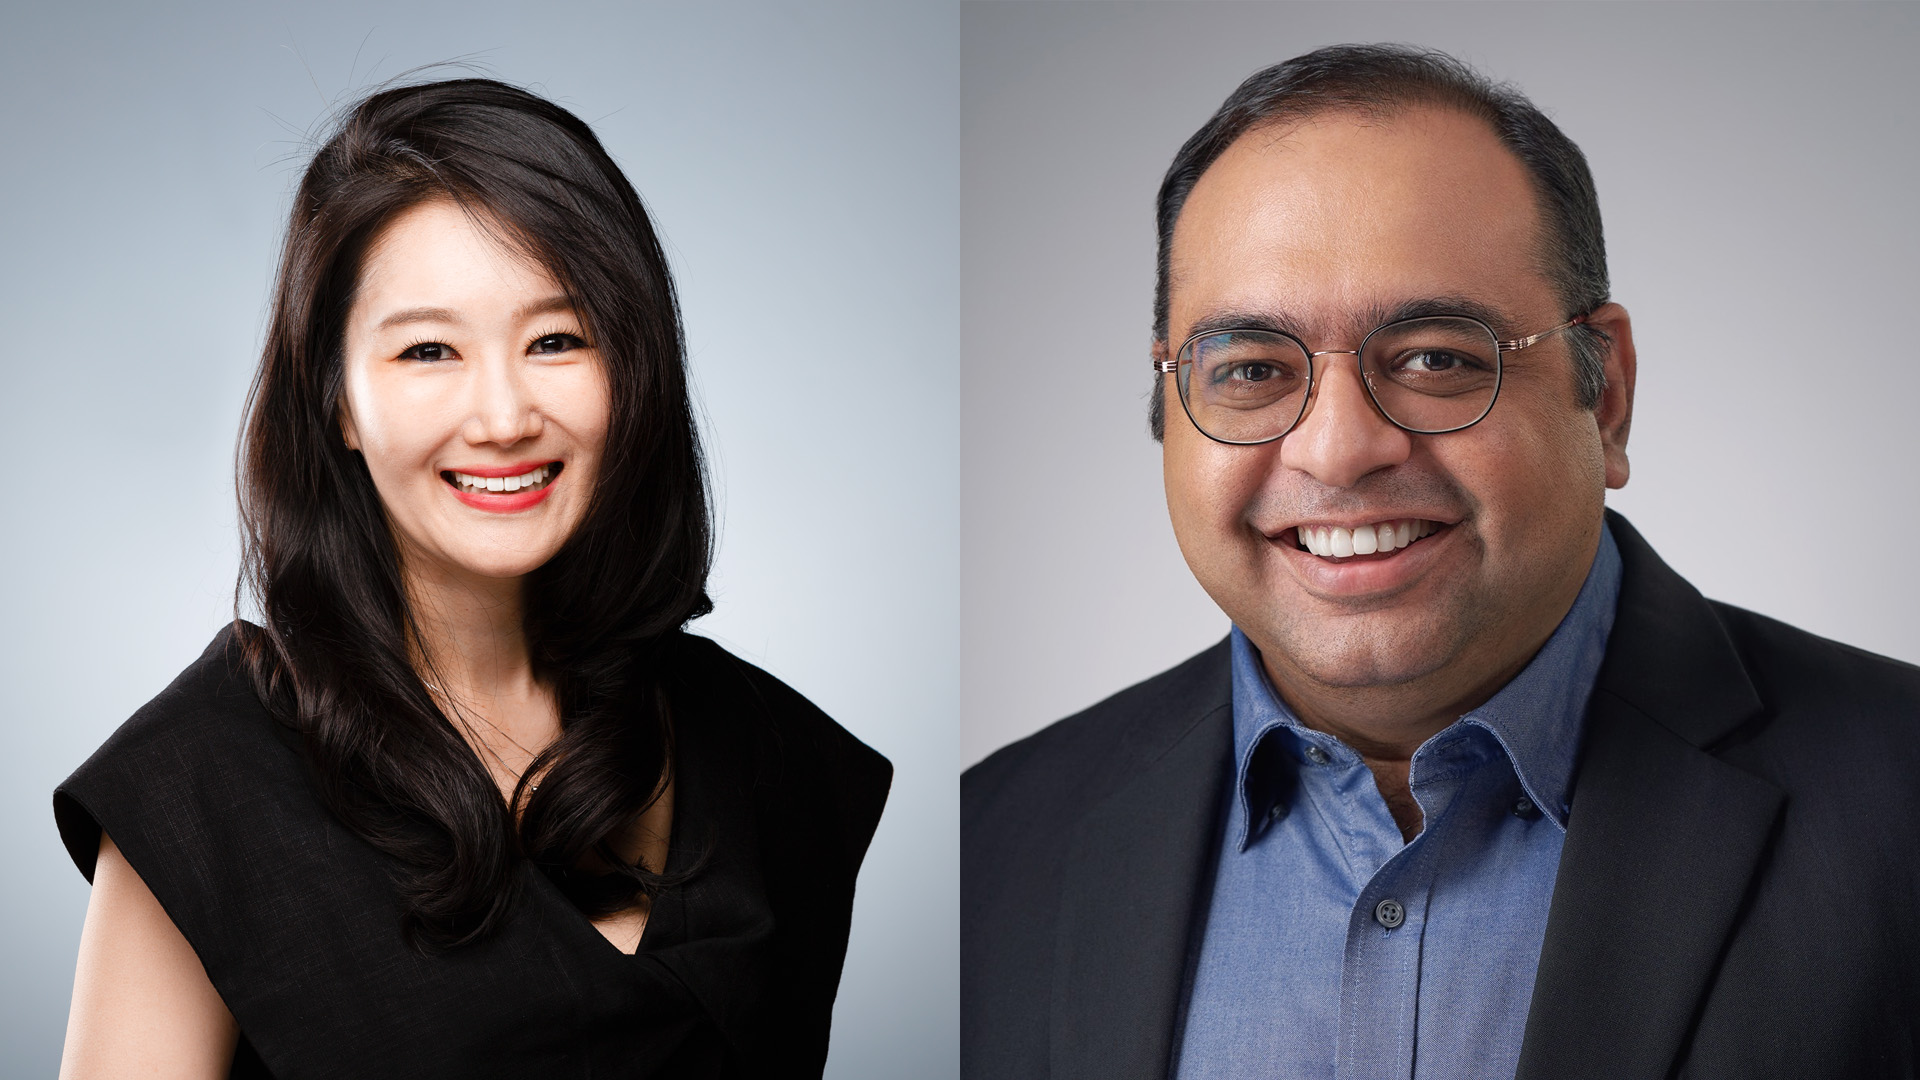 Venus Jin (left) and Nisar Keshvani (right) will oversee curricular matters and communication and public affairs efforts in their new roles